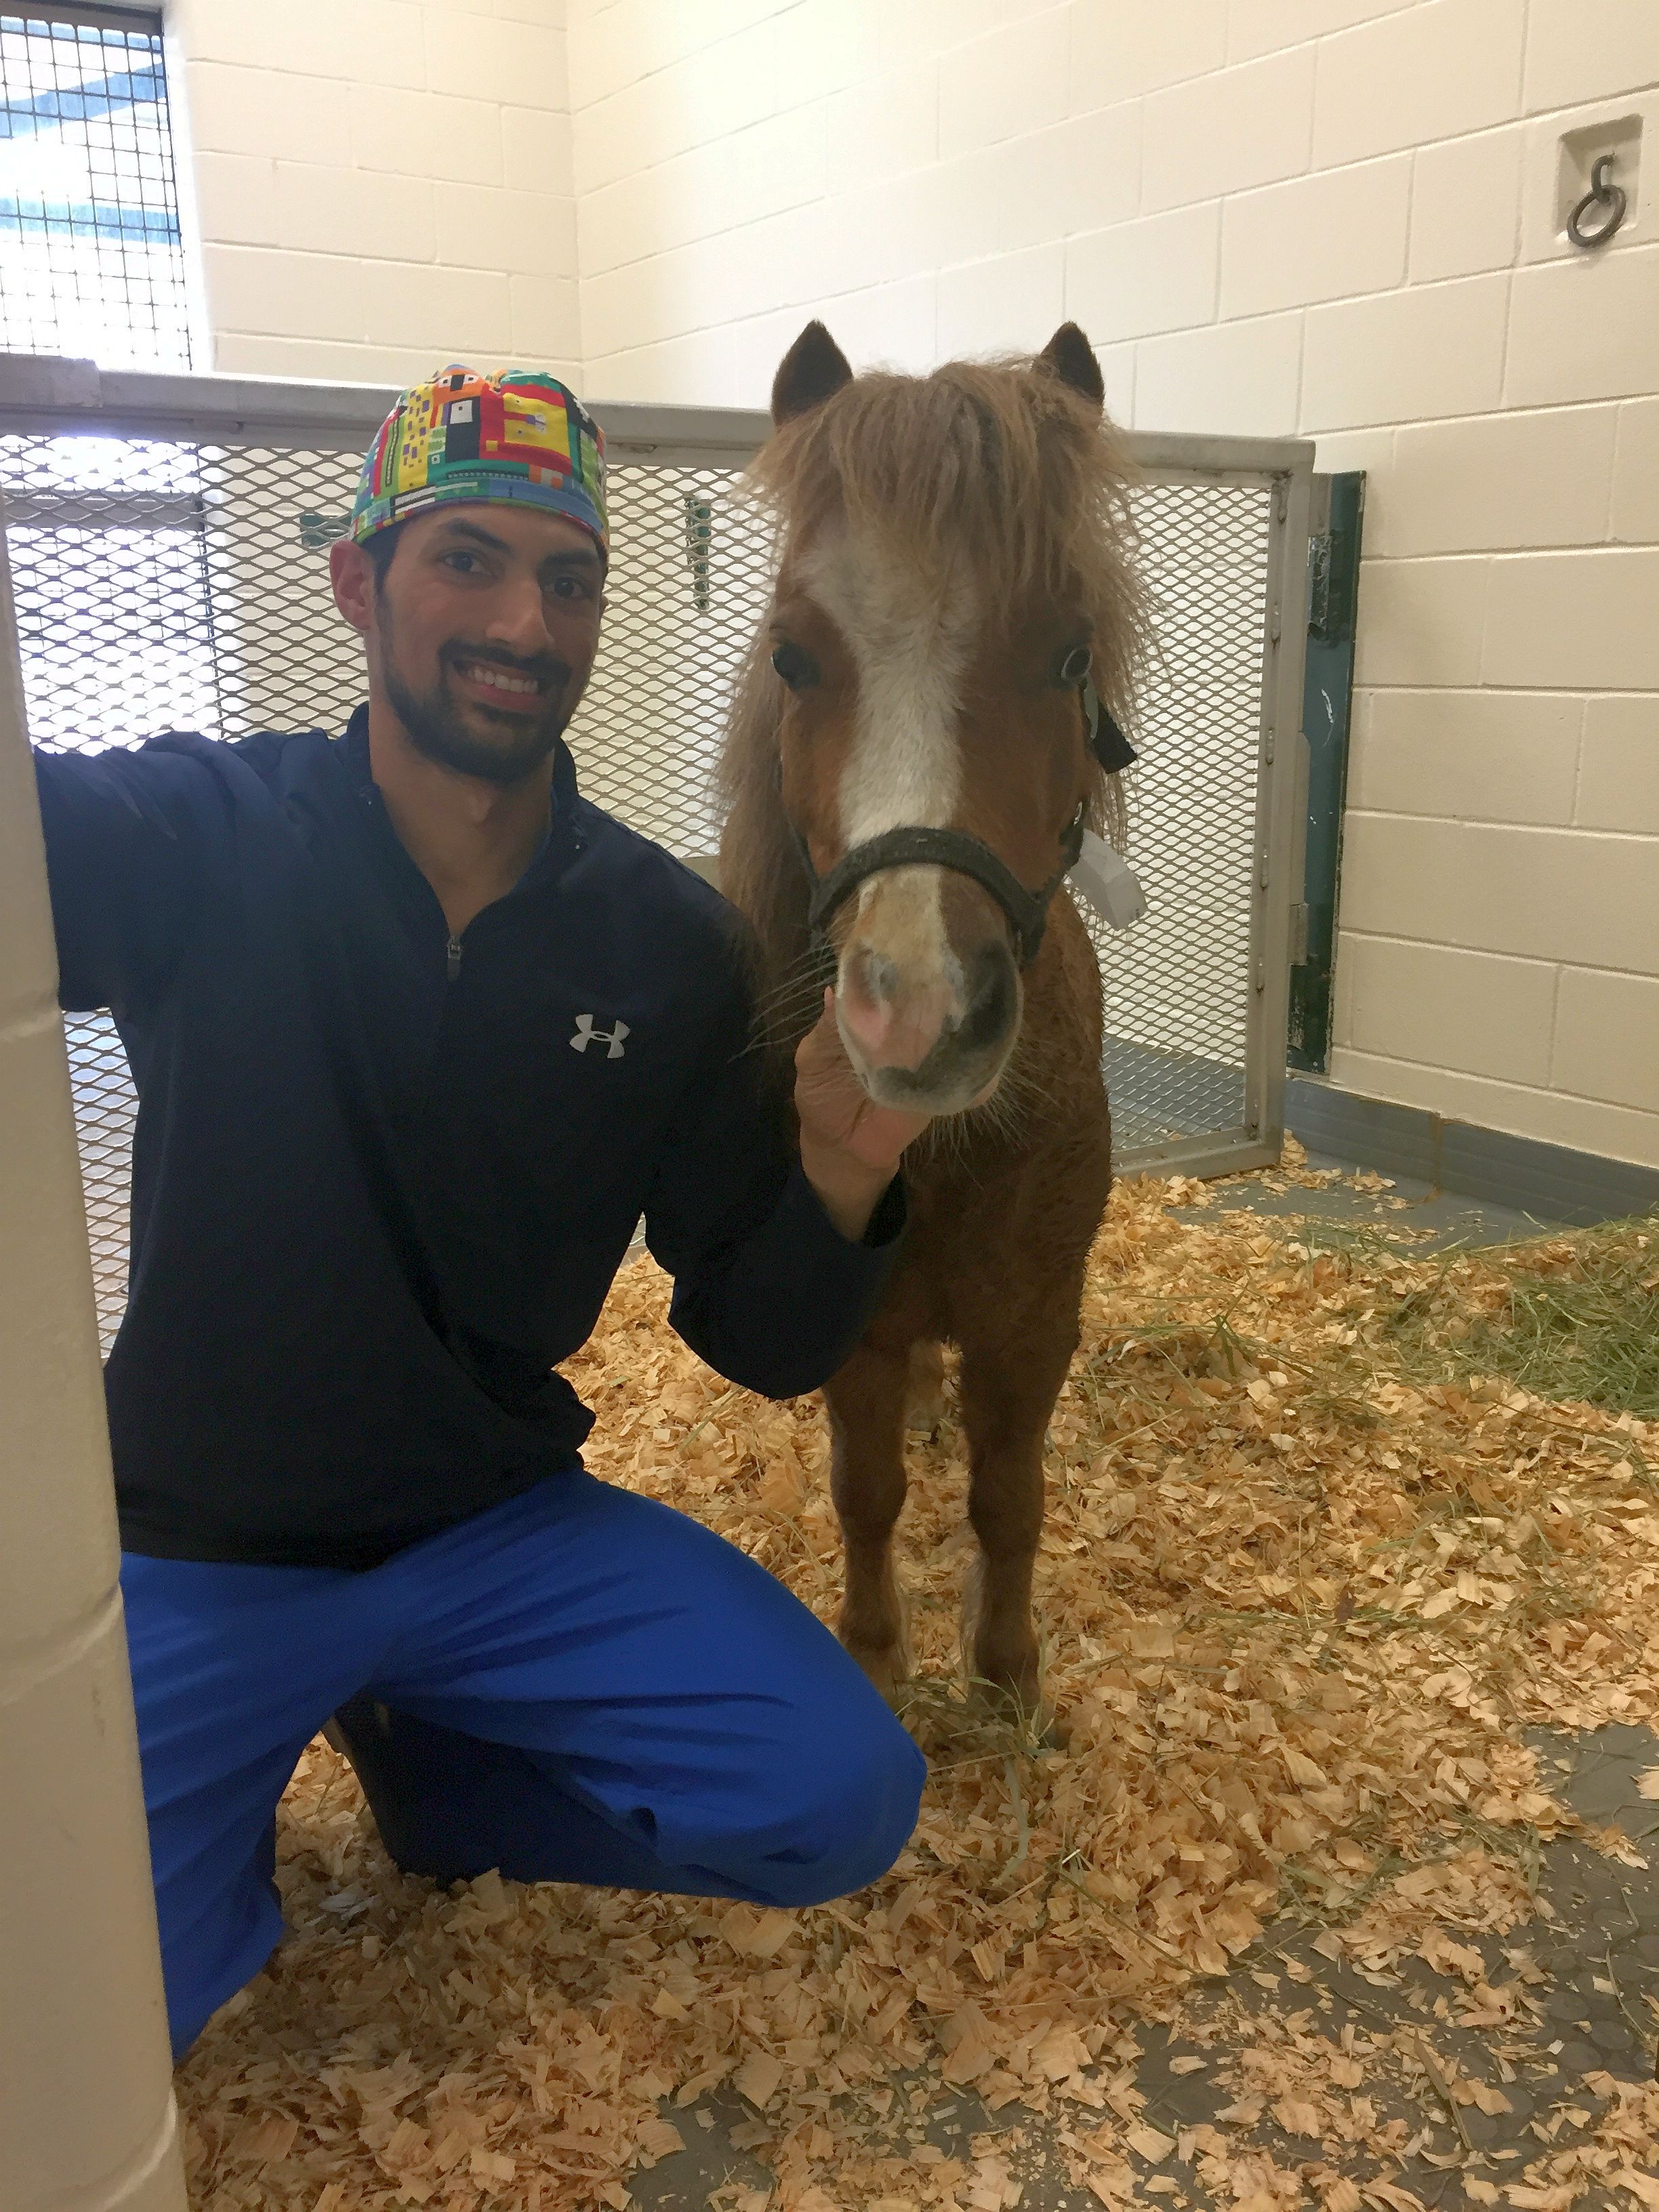 Miniature horse thriving after rare surgery at UF Large Animal Hospital |  UF Health, University of Florida Health